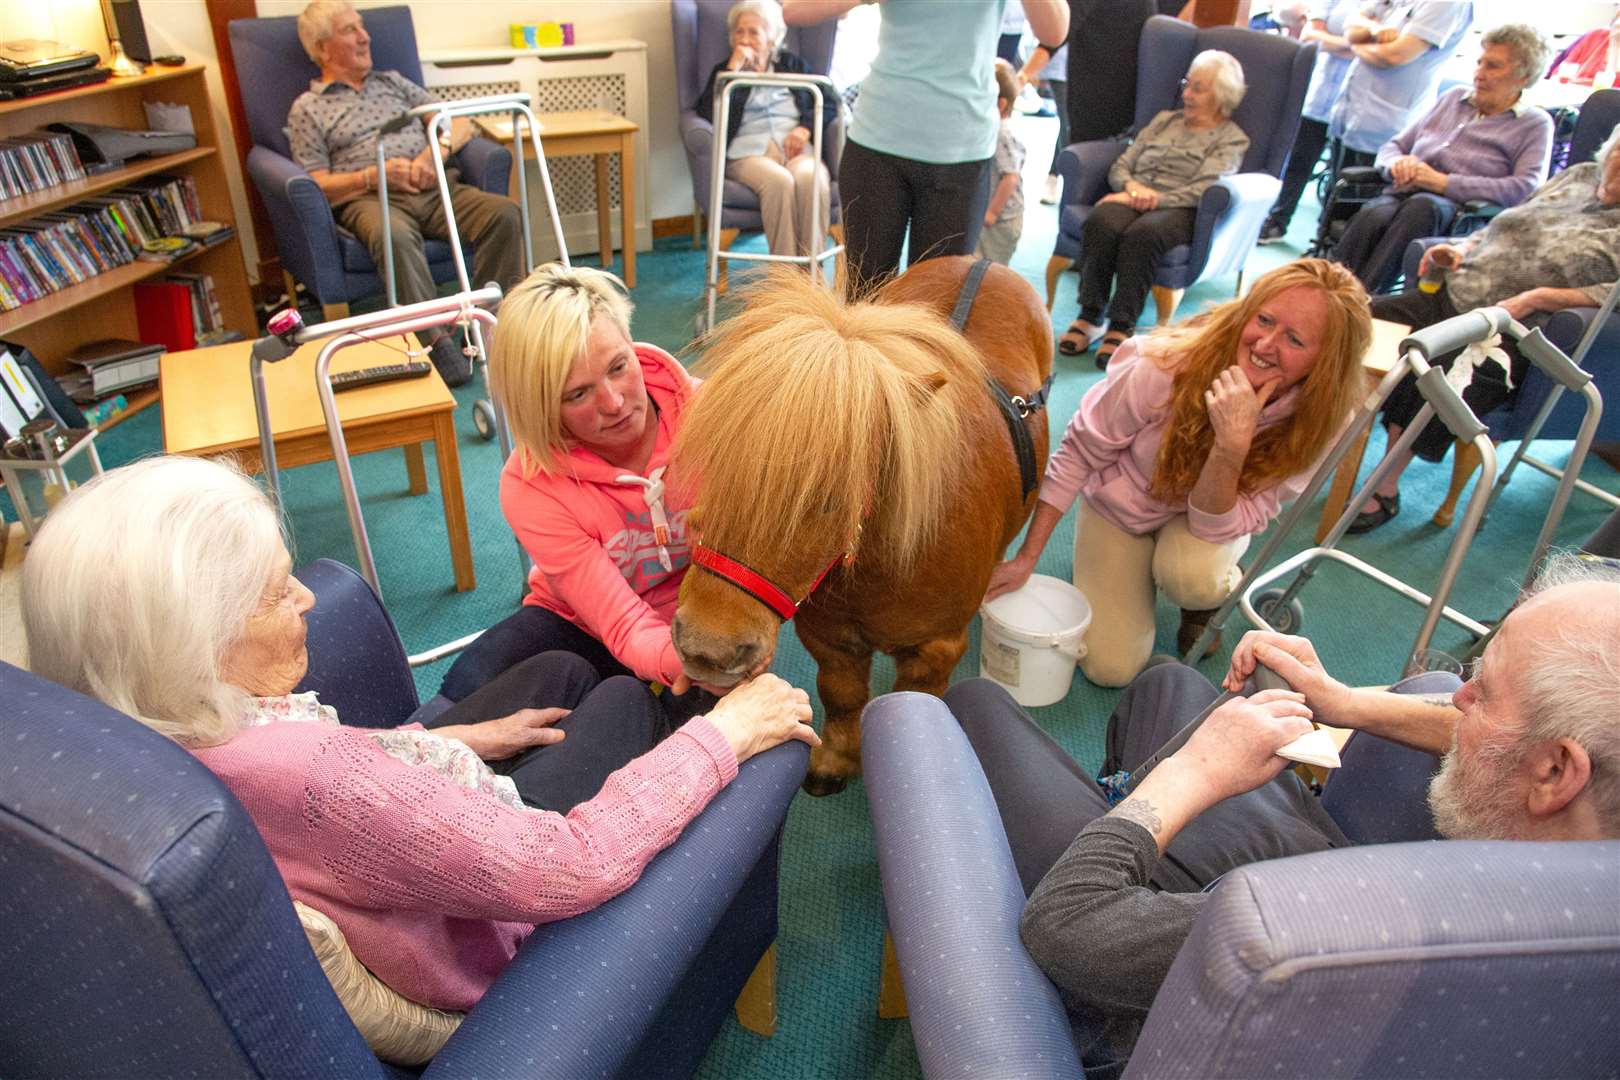 Edward, the Miniature Shetland pony visits the Meadowlark Care Home in Forres. Picture: Daniel Forsyth. Image No.043827.